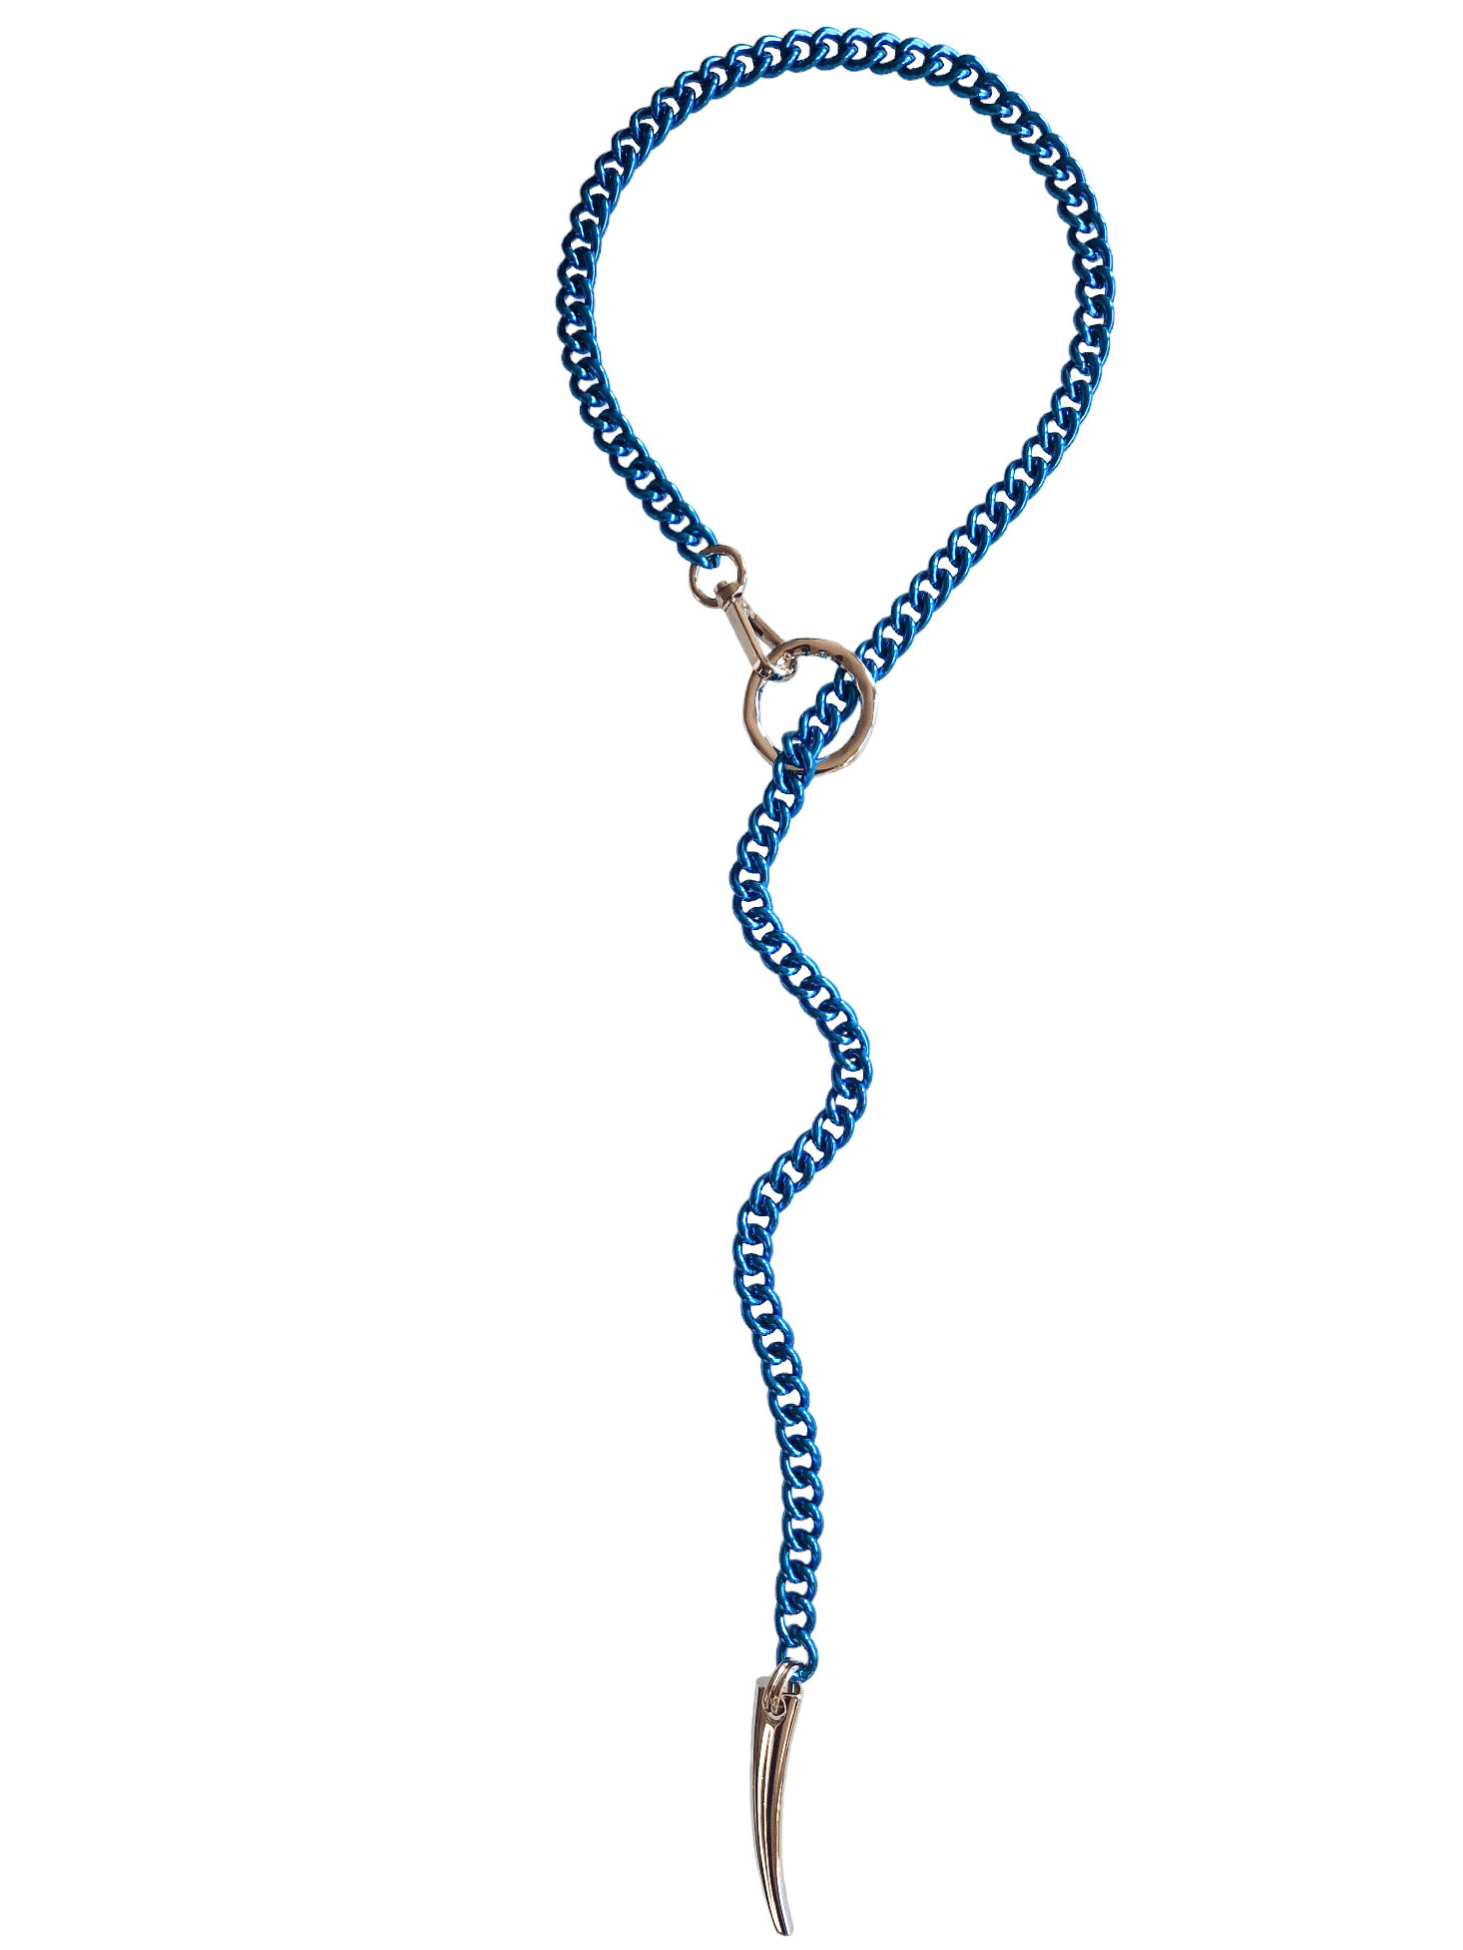 blue long chain necklace with oring and spike pendant